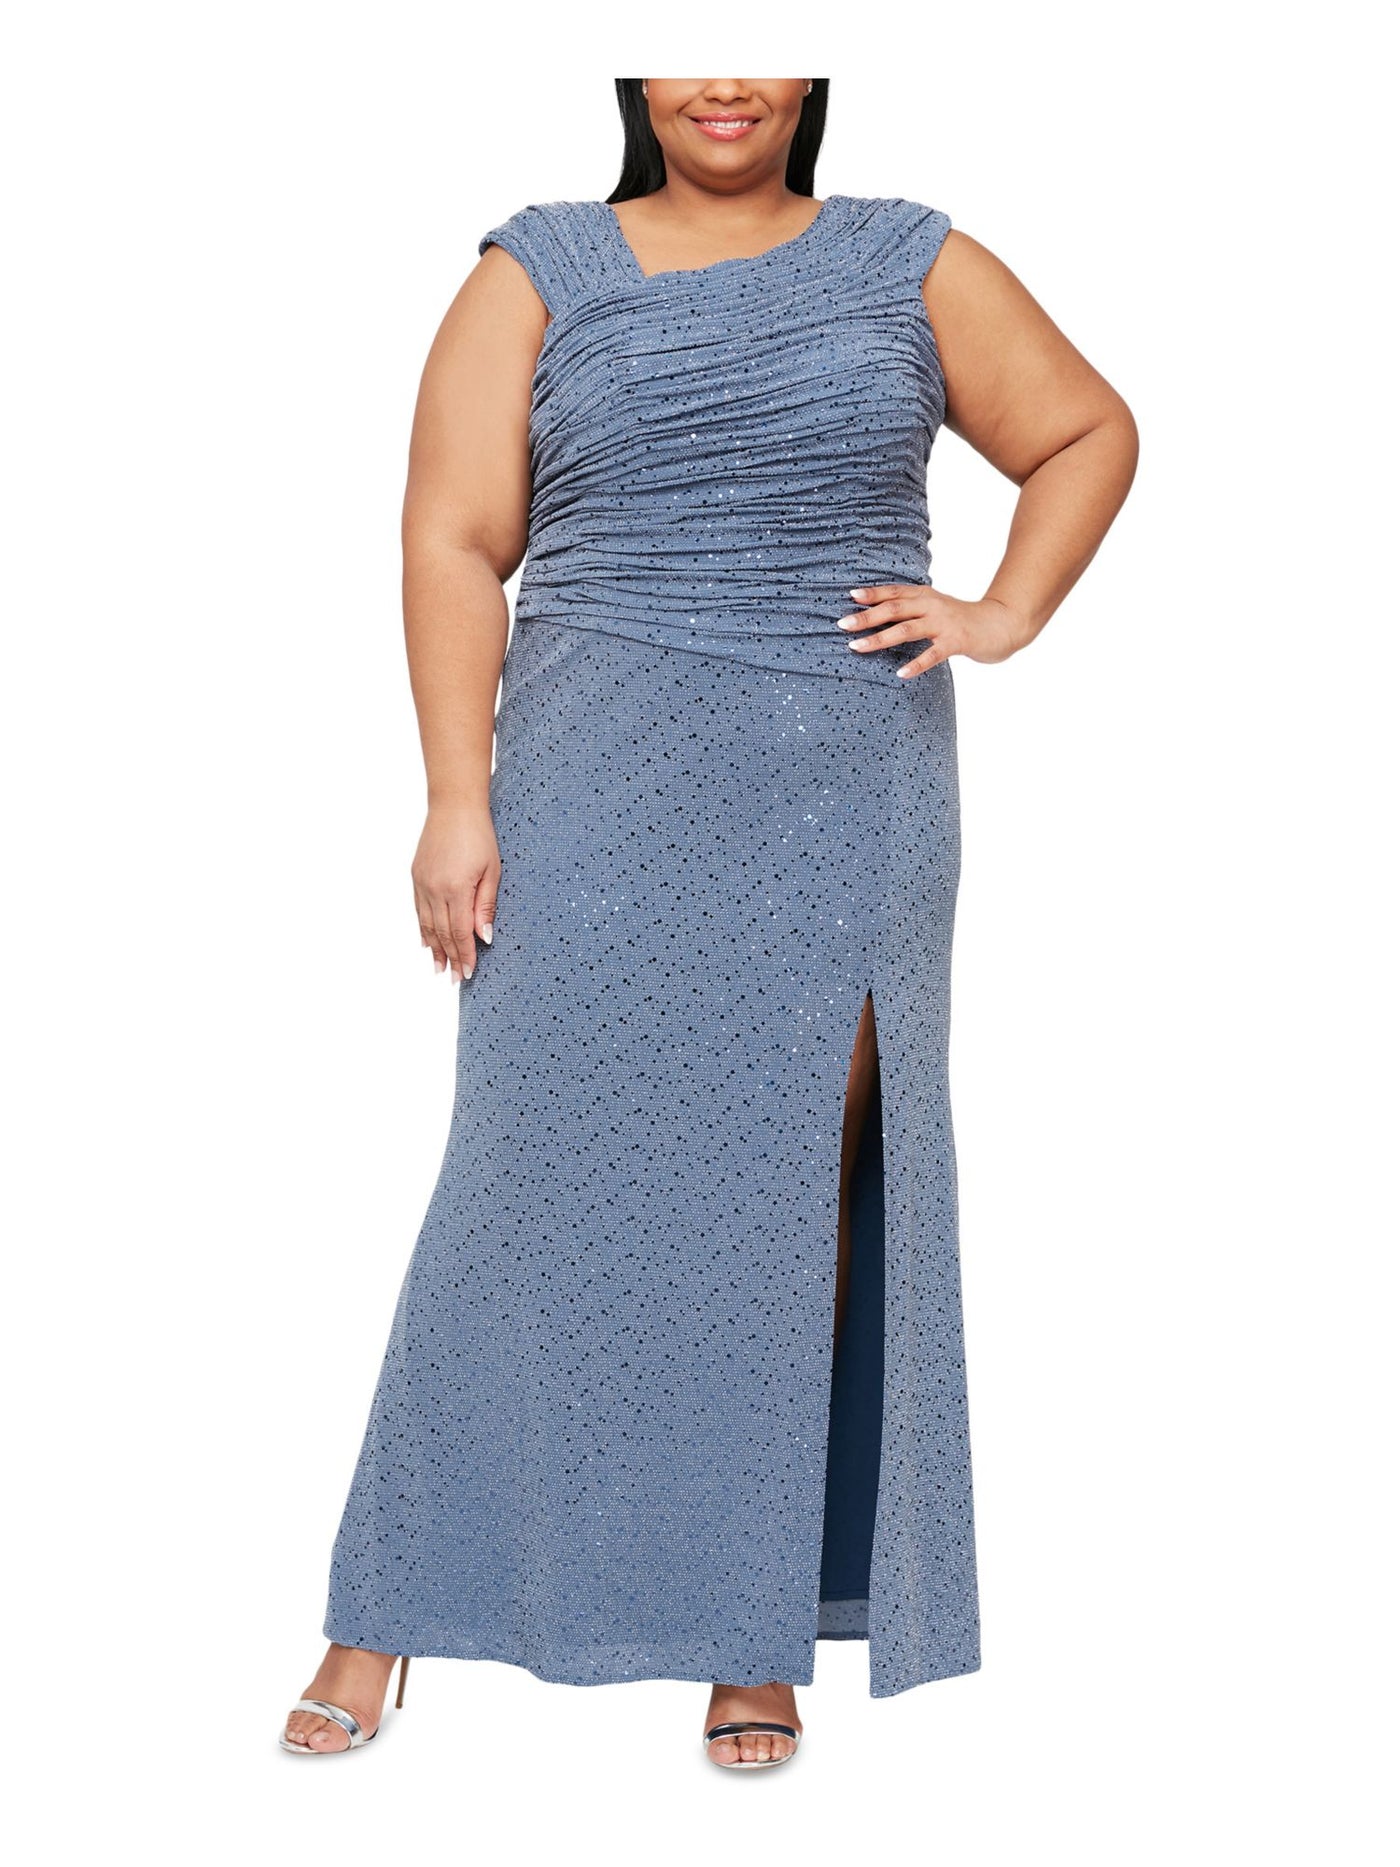 ALEX EVENINGS Womens Blue Slitted Zippered Ruched Lined Embellished Sleeveless Asymmetrical Neckline Full-Length Evening Gown Dress Plus 22W